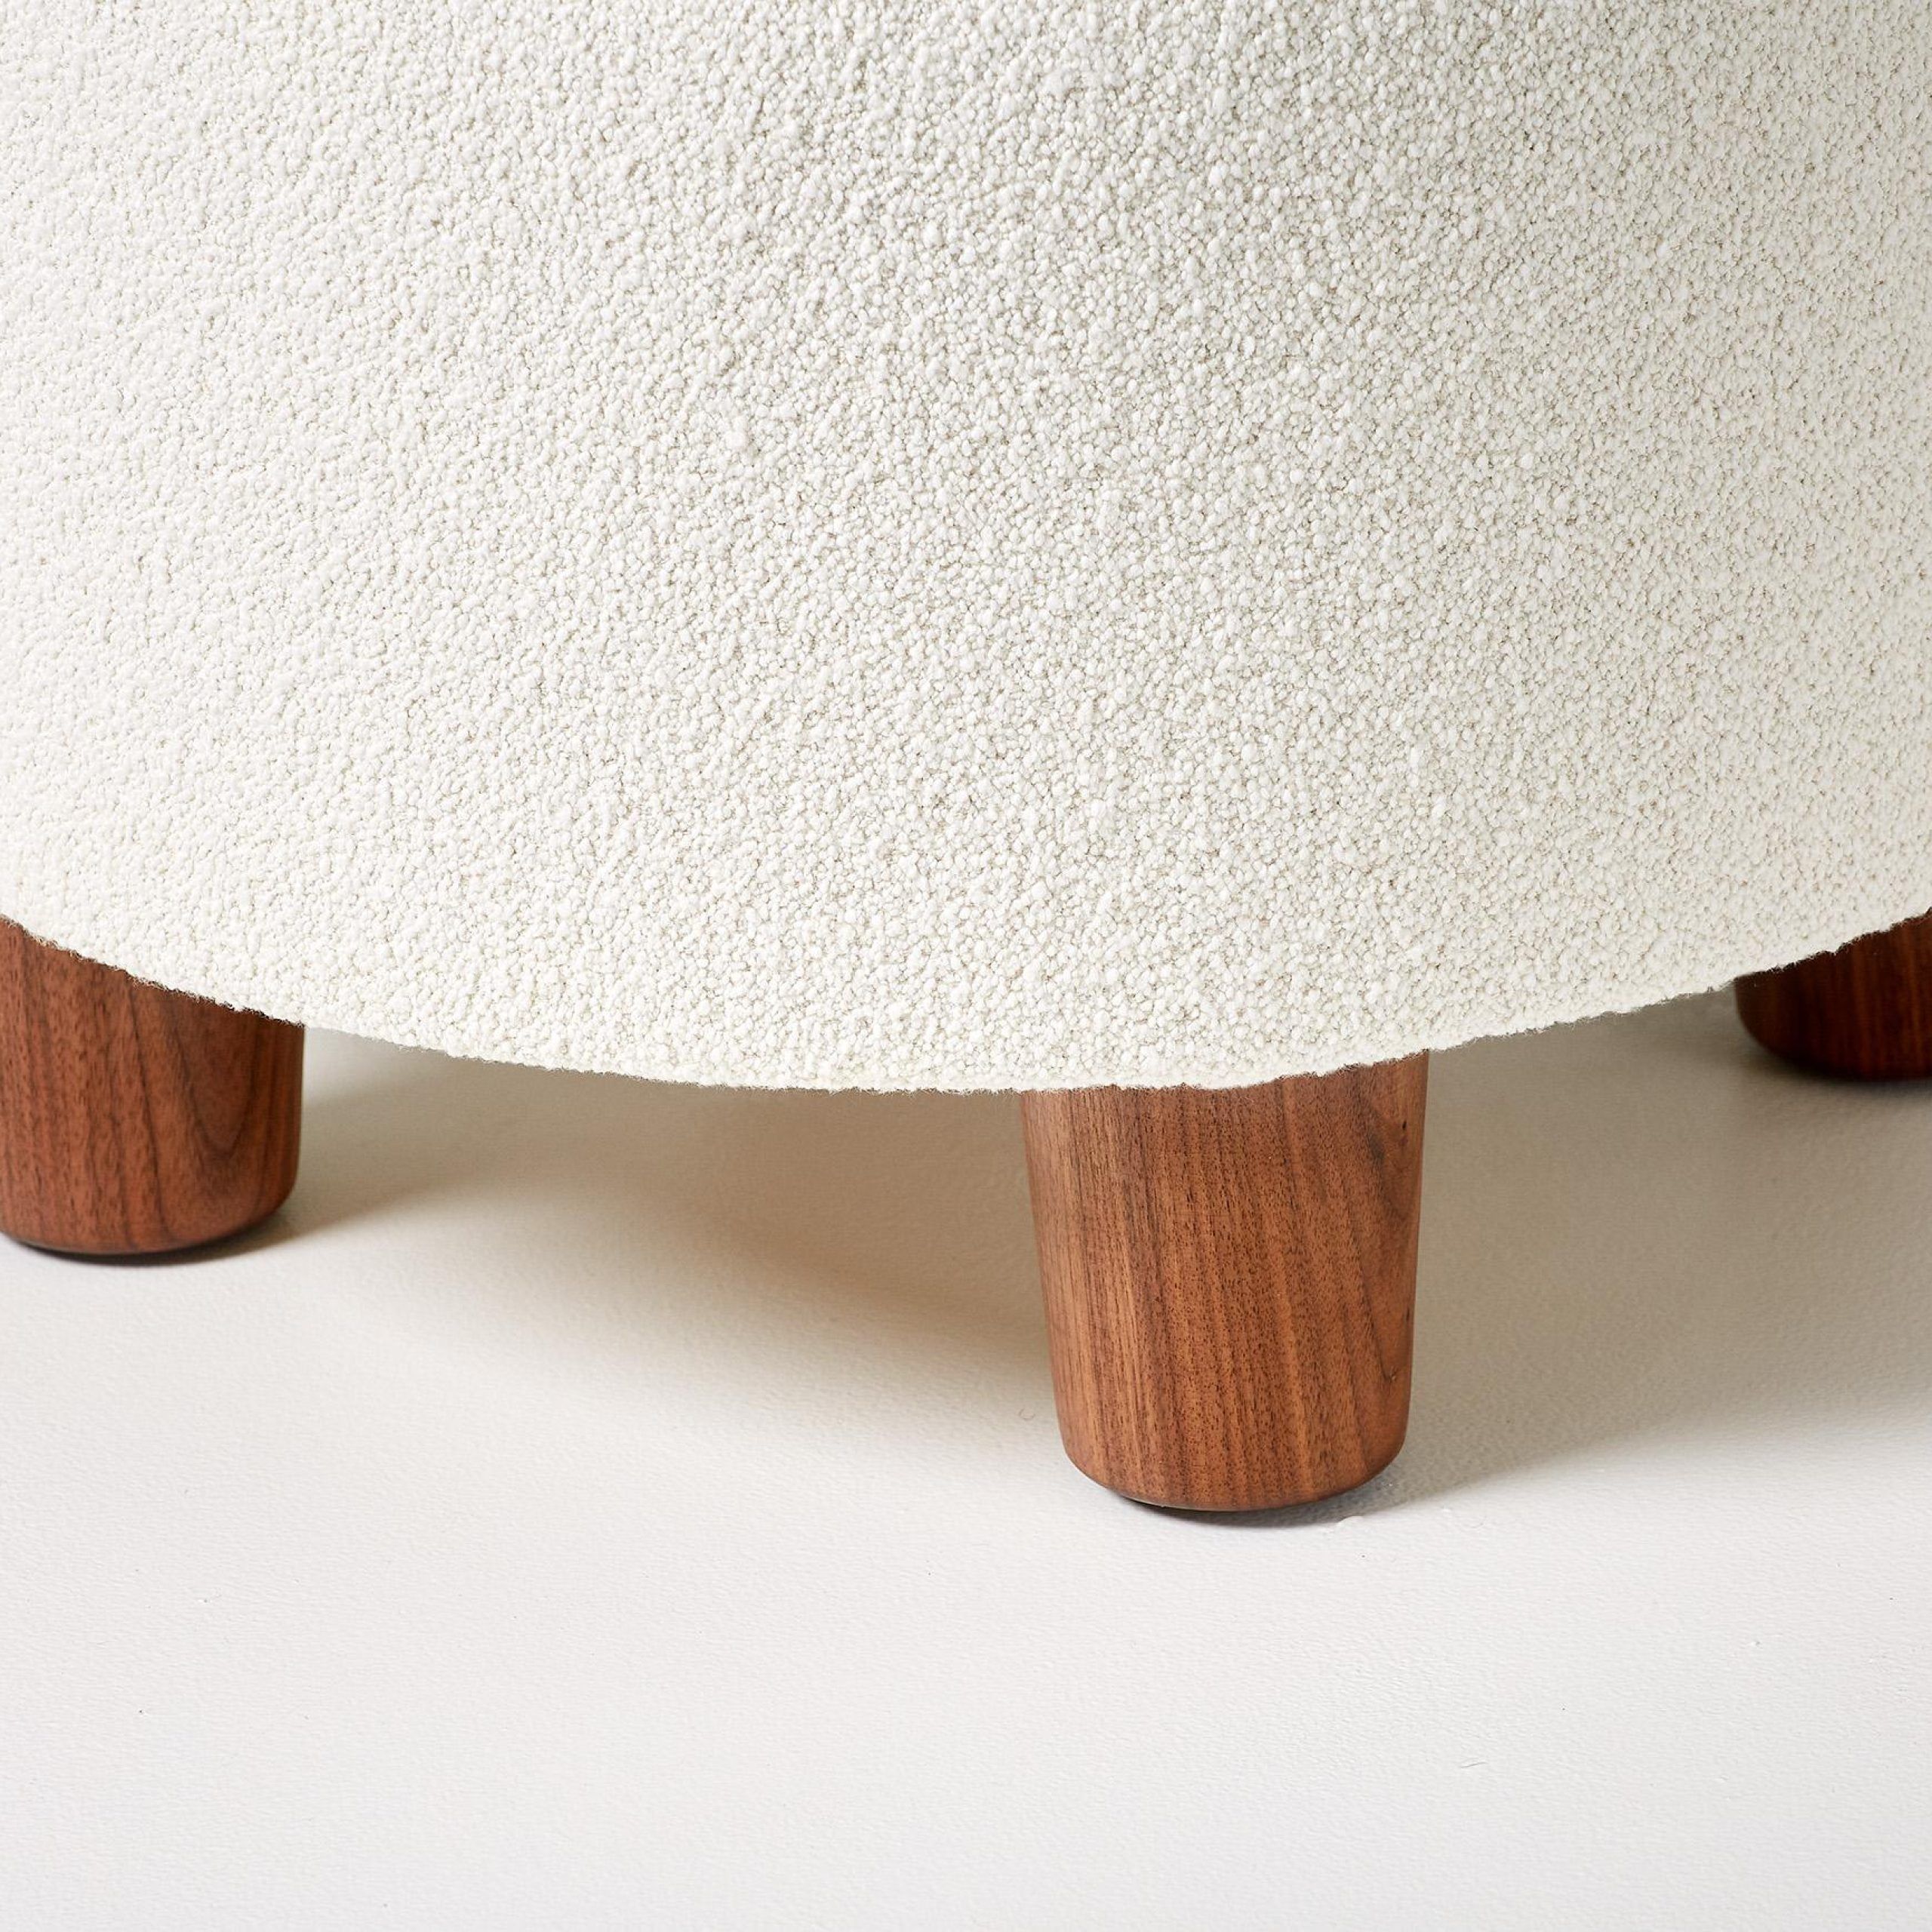 Custom Made Round Boucle Ottoman With Walnut Legs For Sale At 1stdibs Pertaining To Walnut Round Ottomans (View 14 of 15)